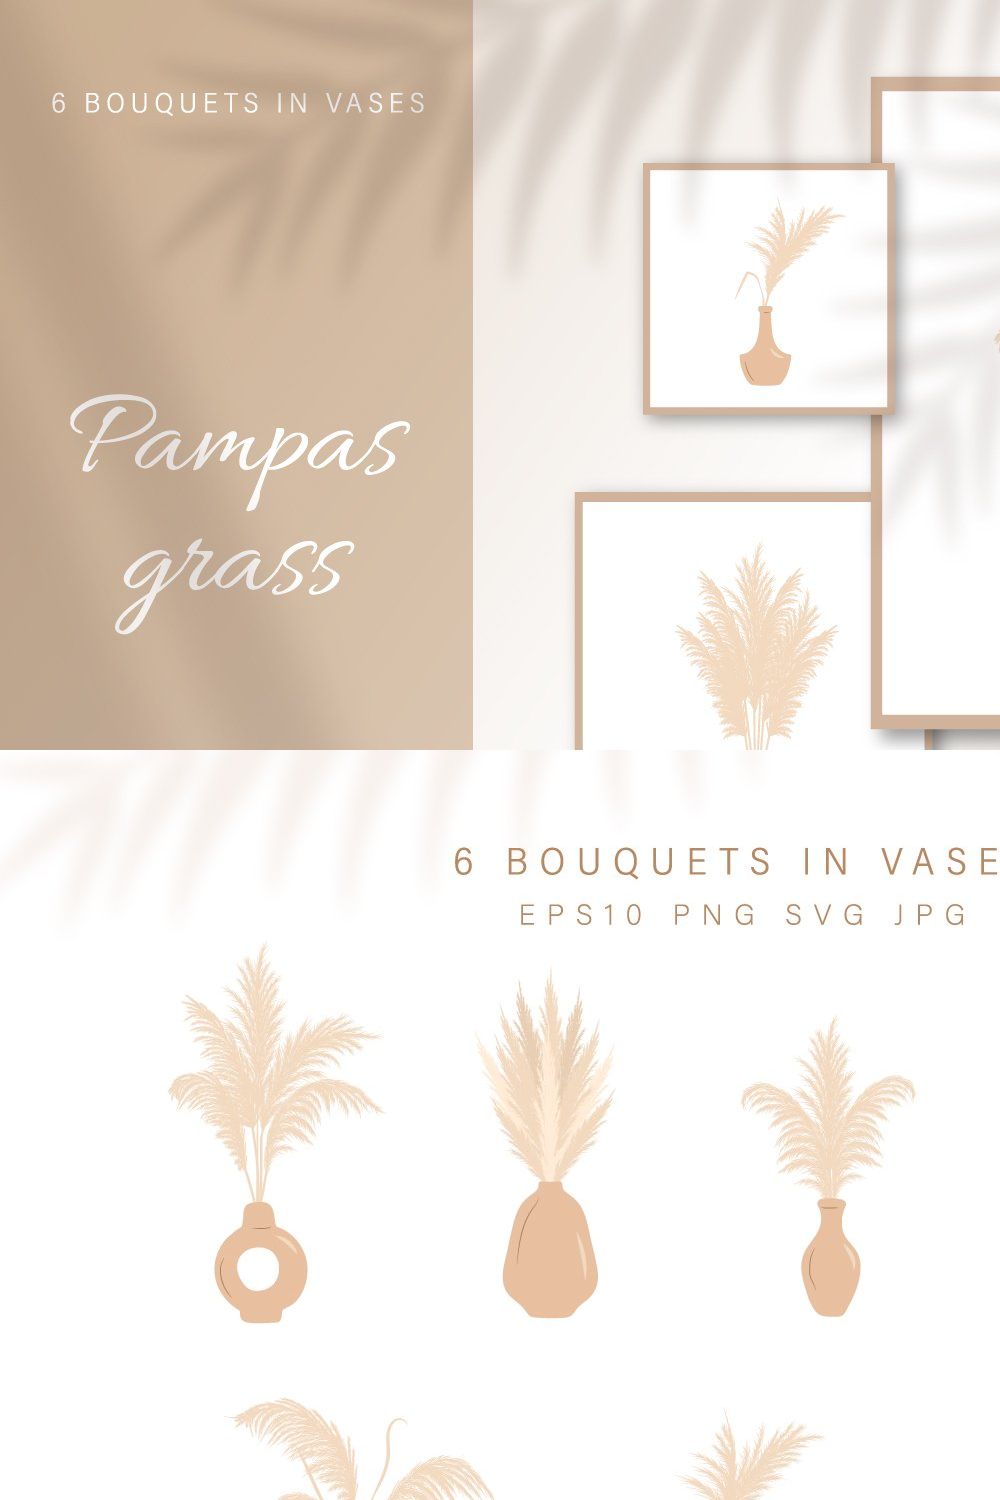 Pampas grass in Vases collection pinterest preview image.